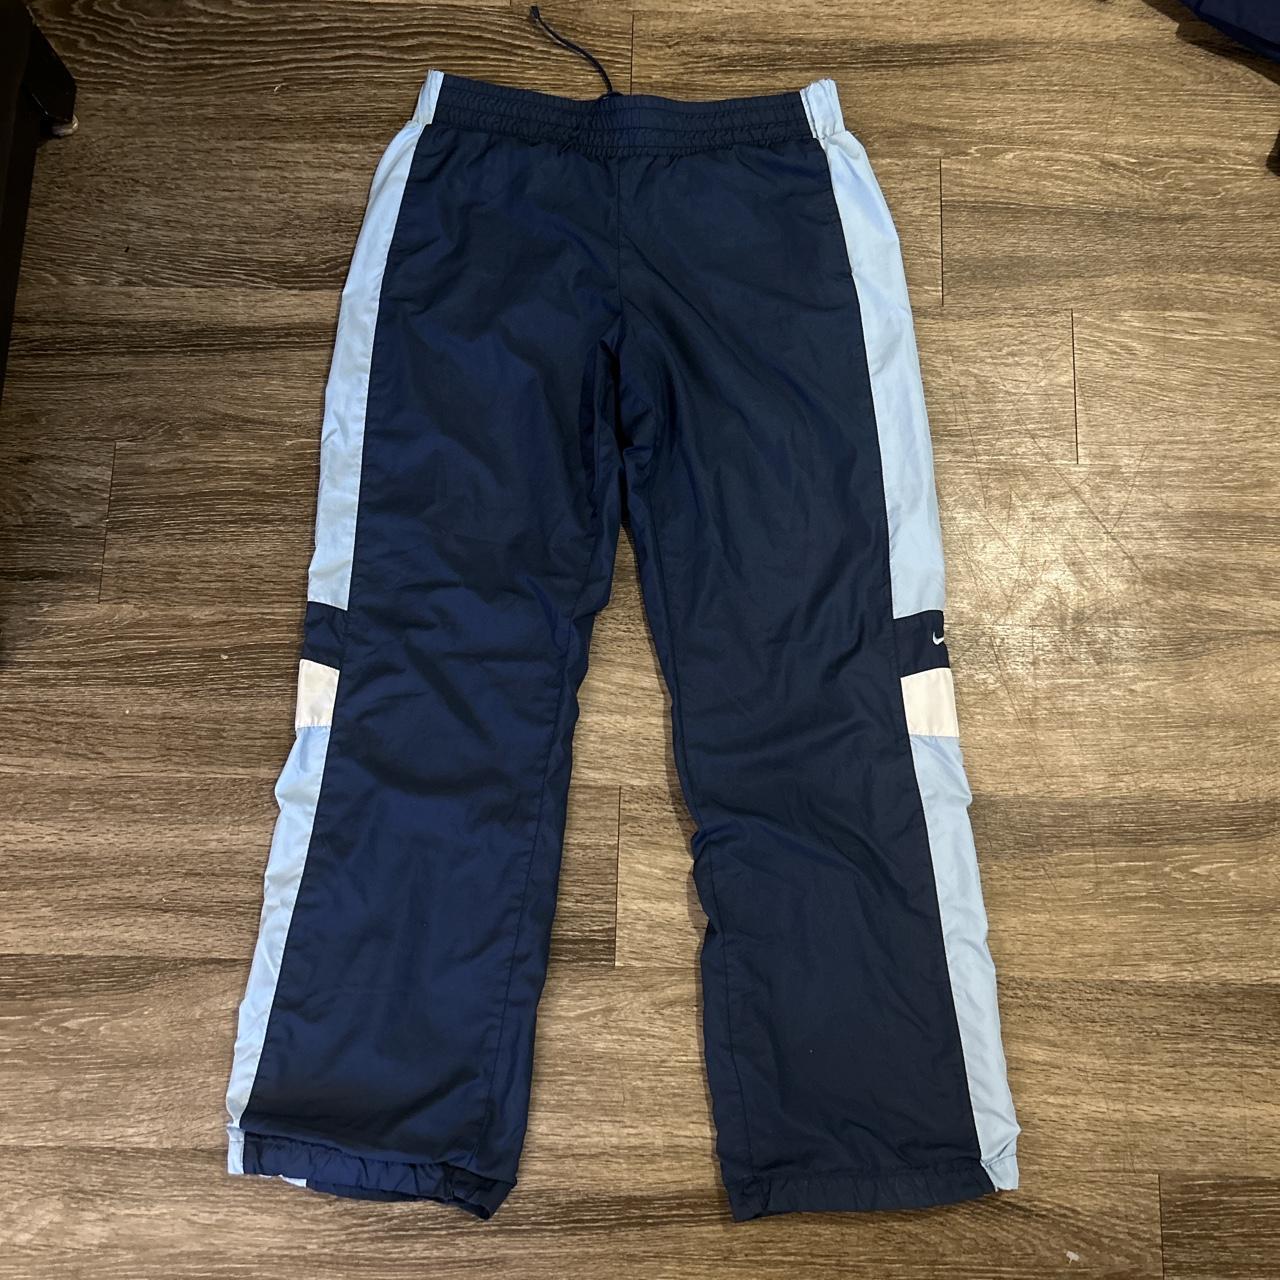 Nike Men's Blue and White Joggers-tracksuits (2)